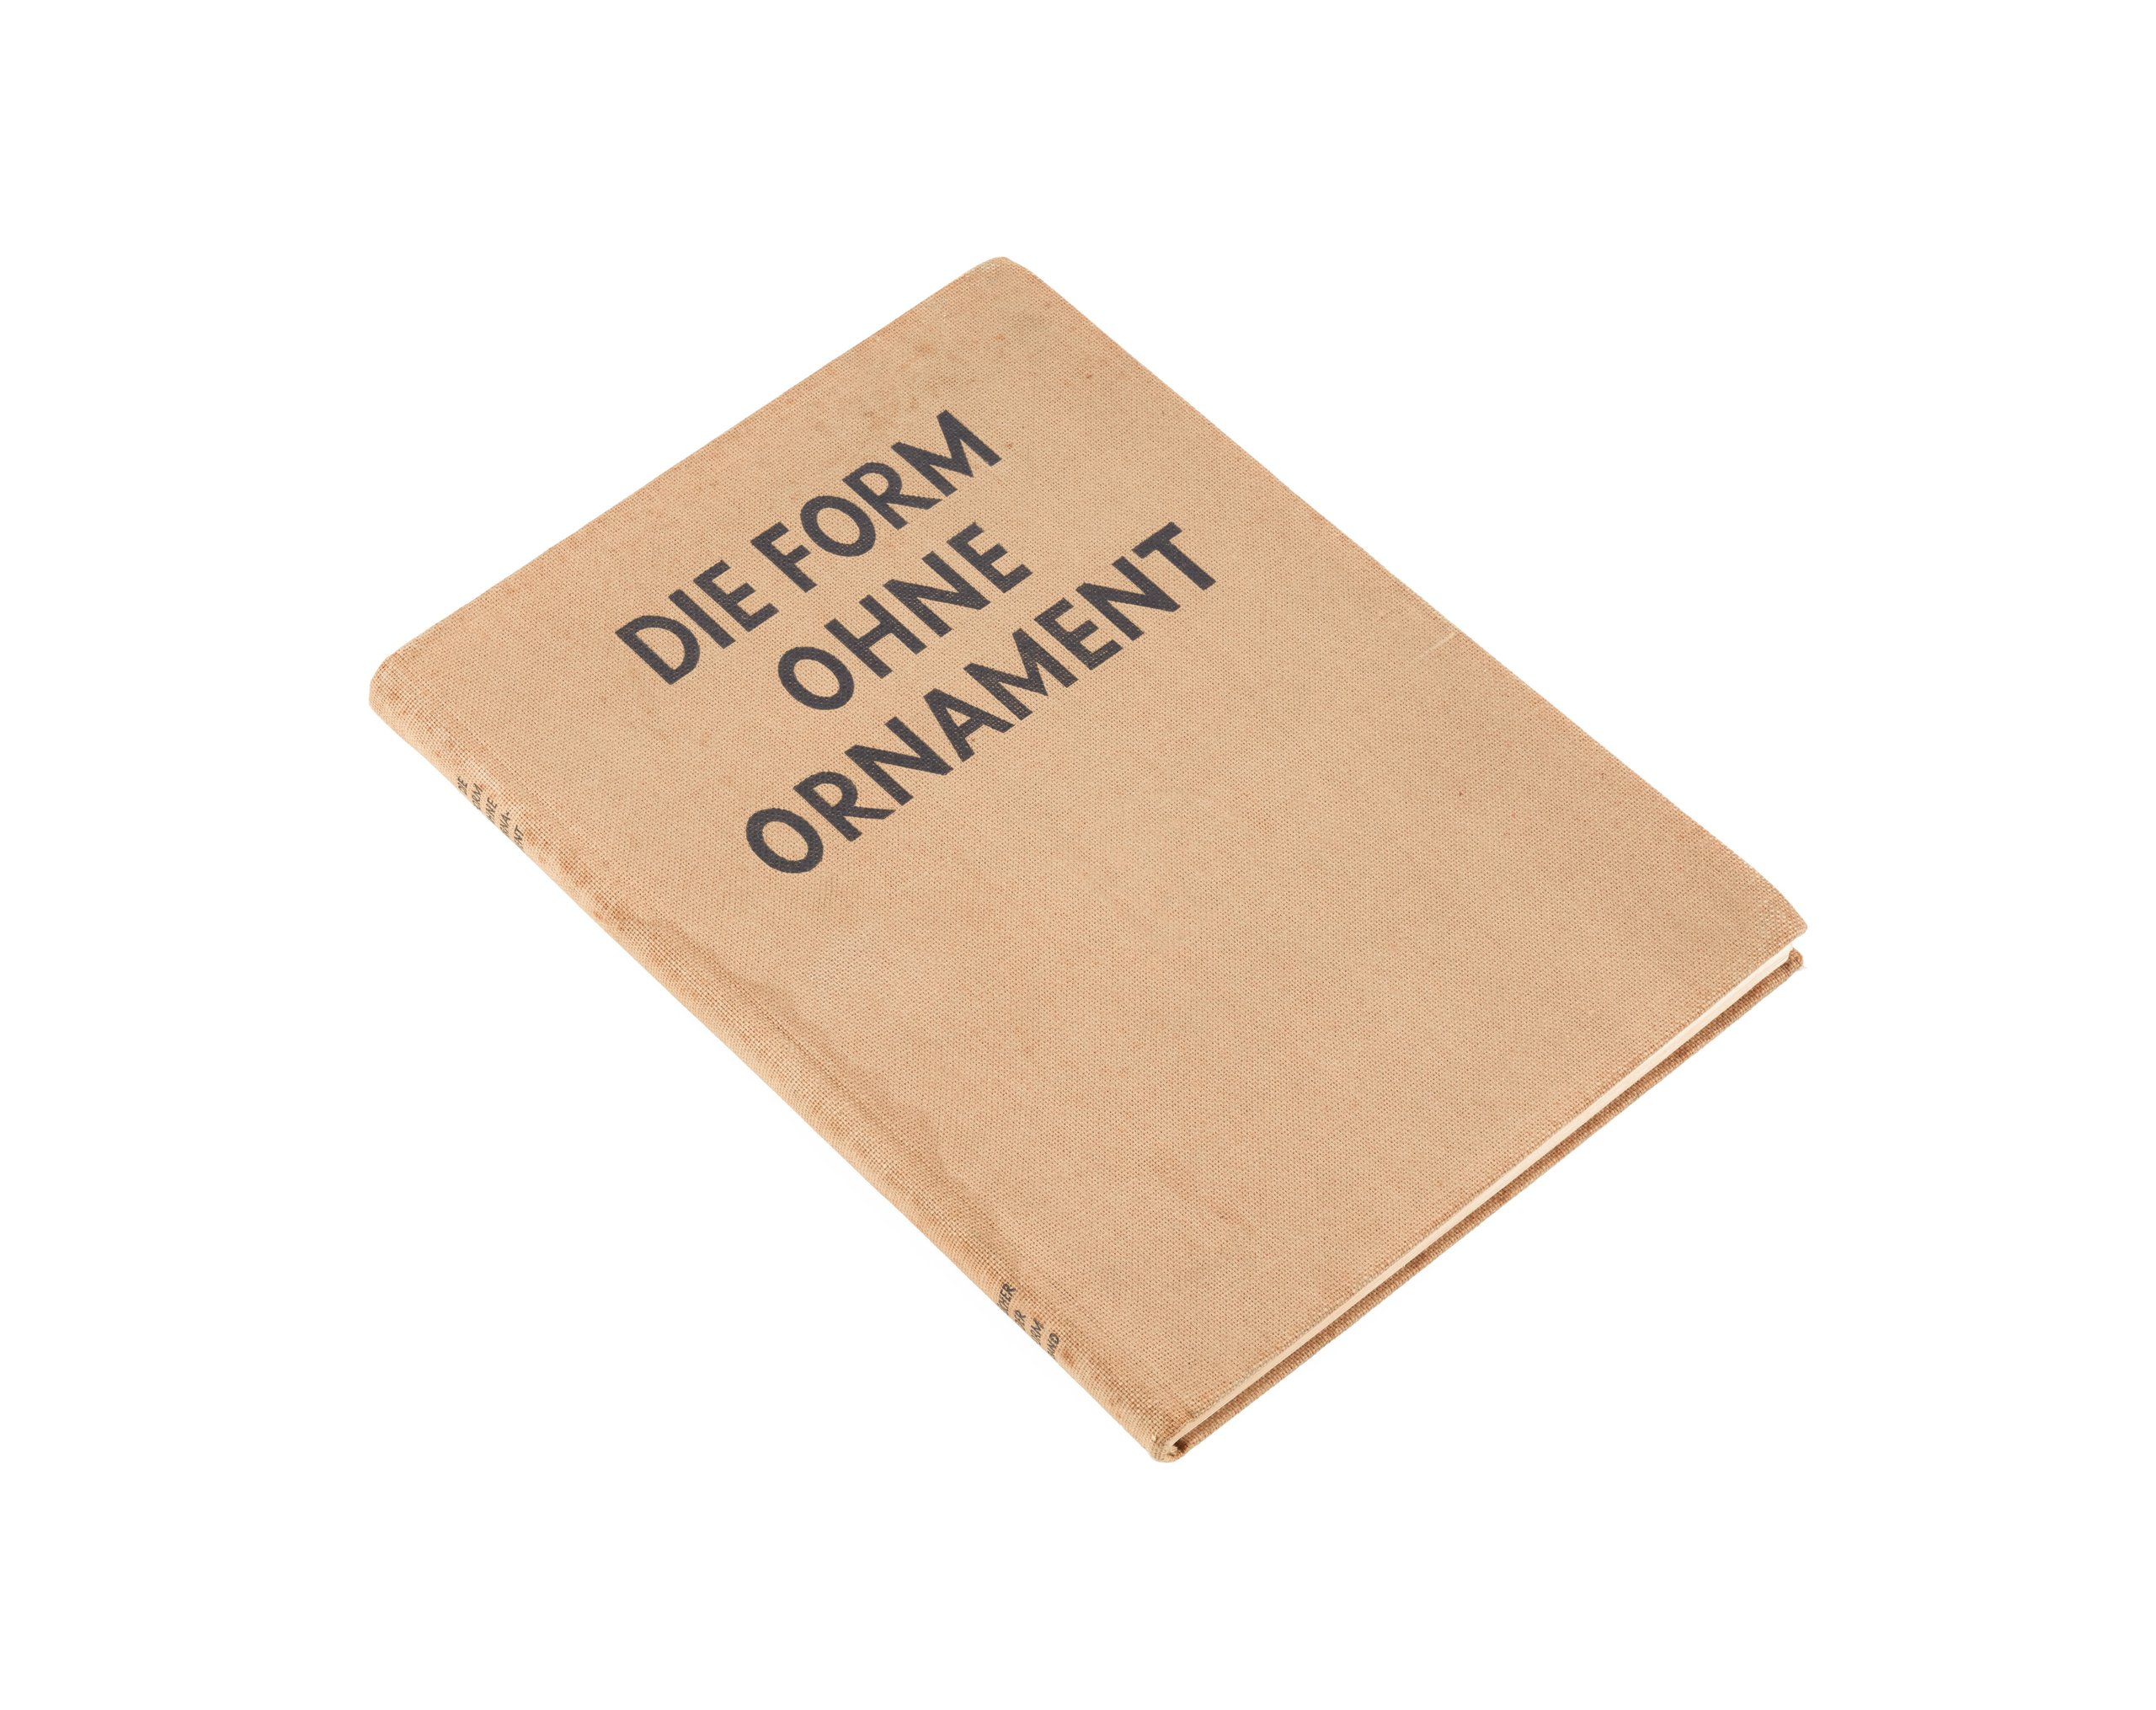 Book 'Die Form Ohne Ornament' (Form without Ornament)